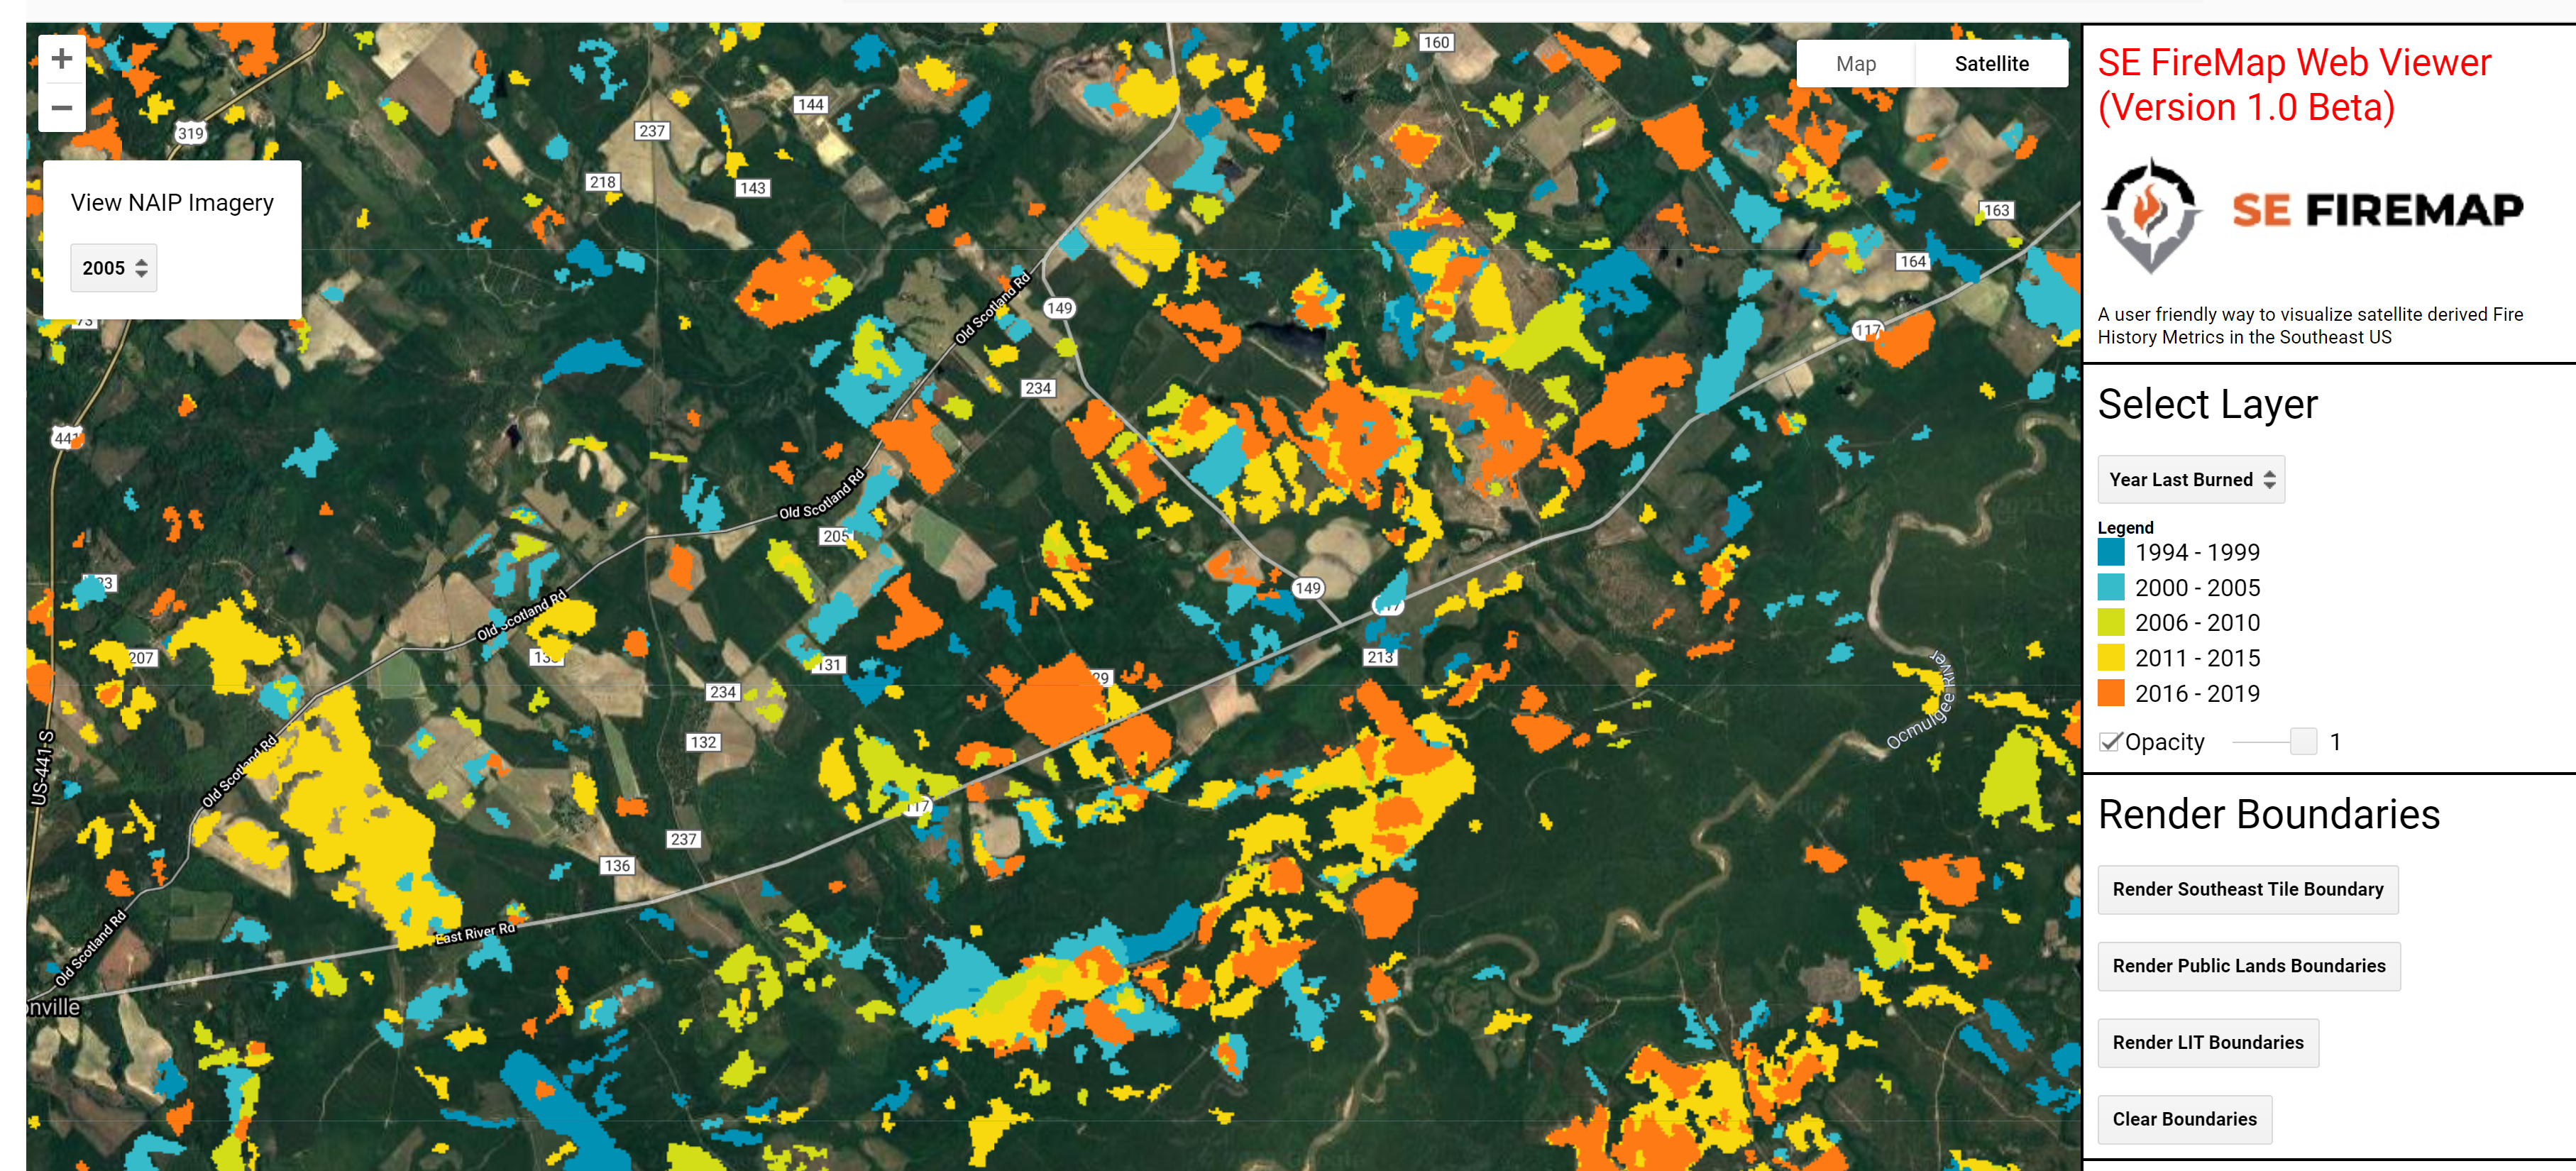 Upcoming Webinar: Introduction to the Southeast FireMap